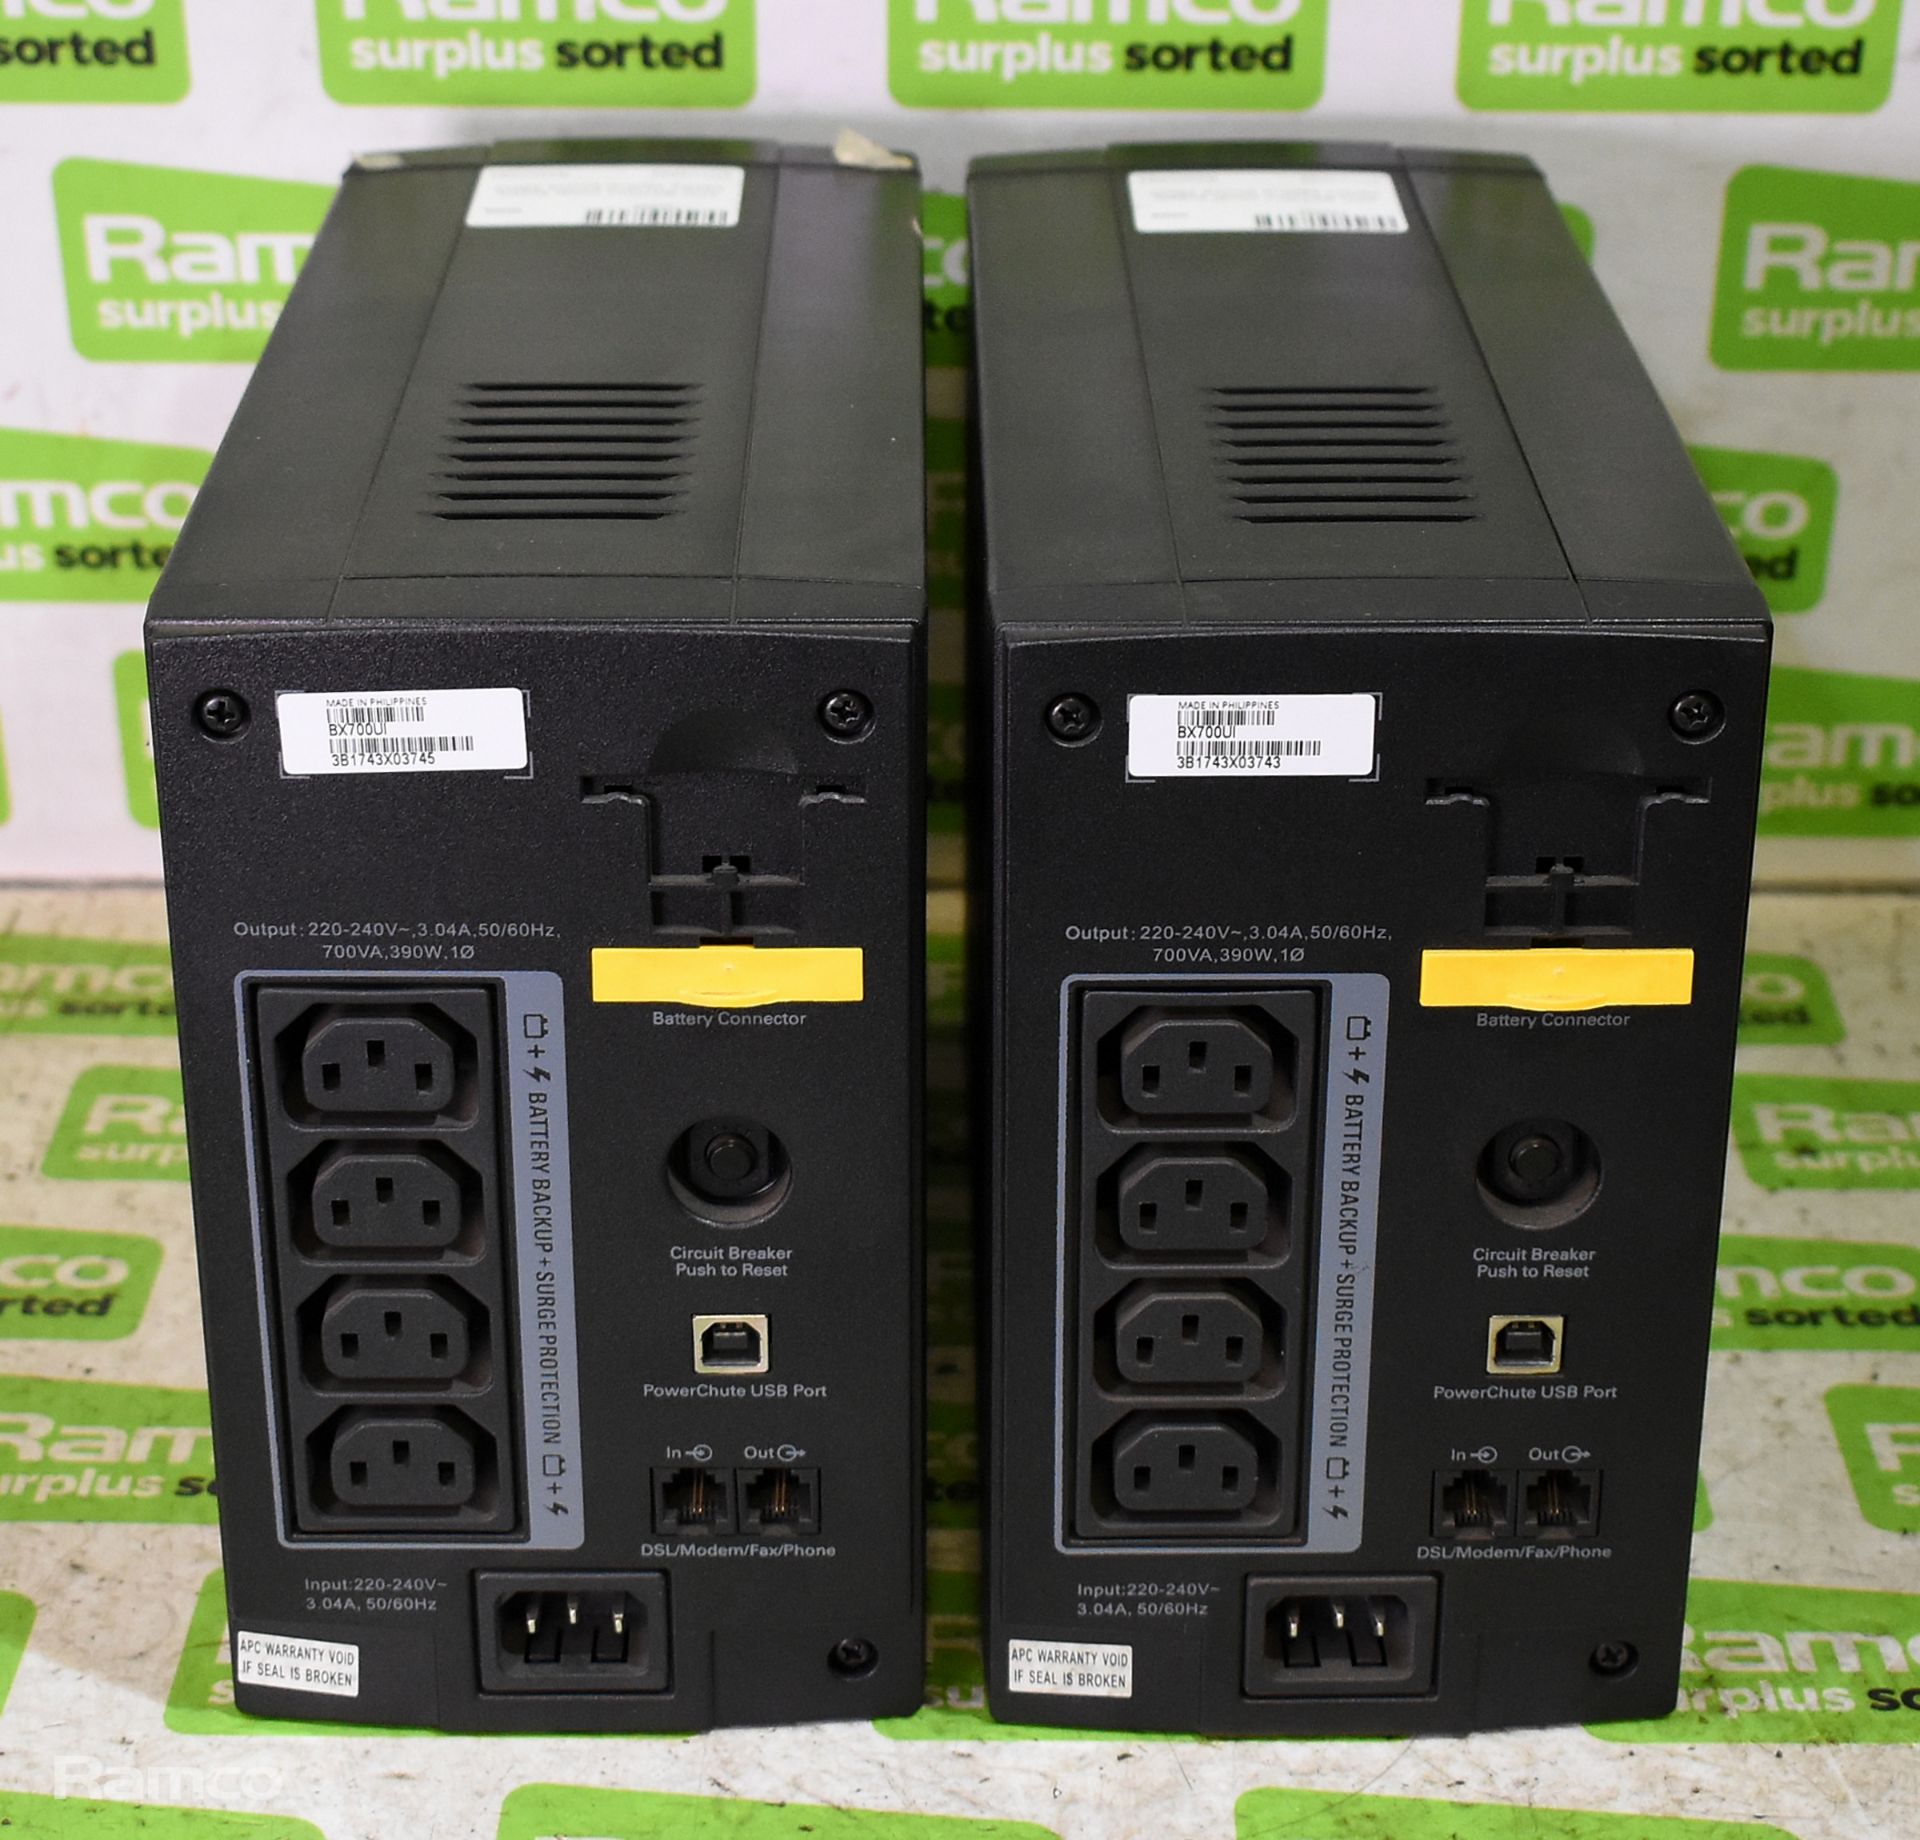 2x APC BX700ui power supply battery backup sources - 390W - Image 3 of 5